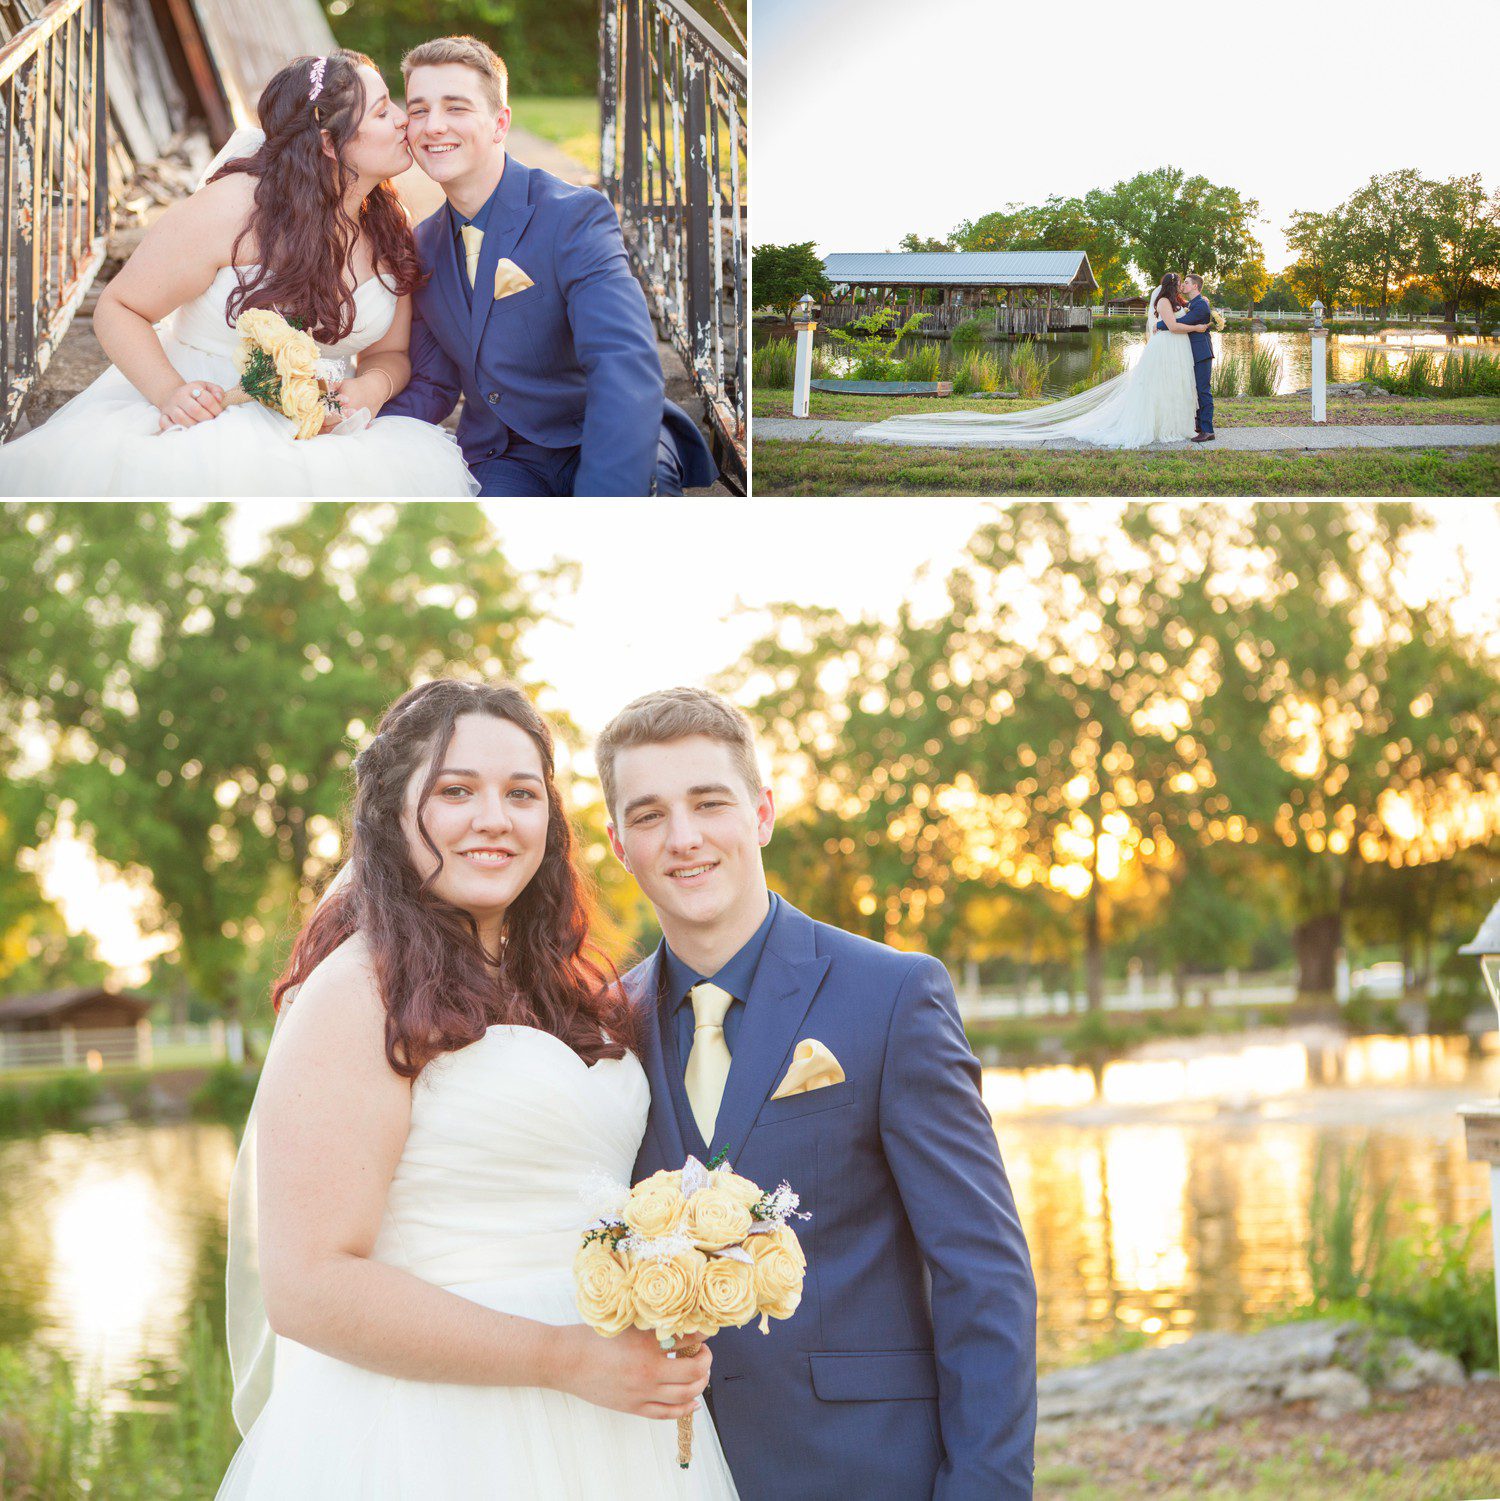 Bride and groom photo at sunset at Legacy Farms in Lebanon, TN, photos by Krista Lee Photography 